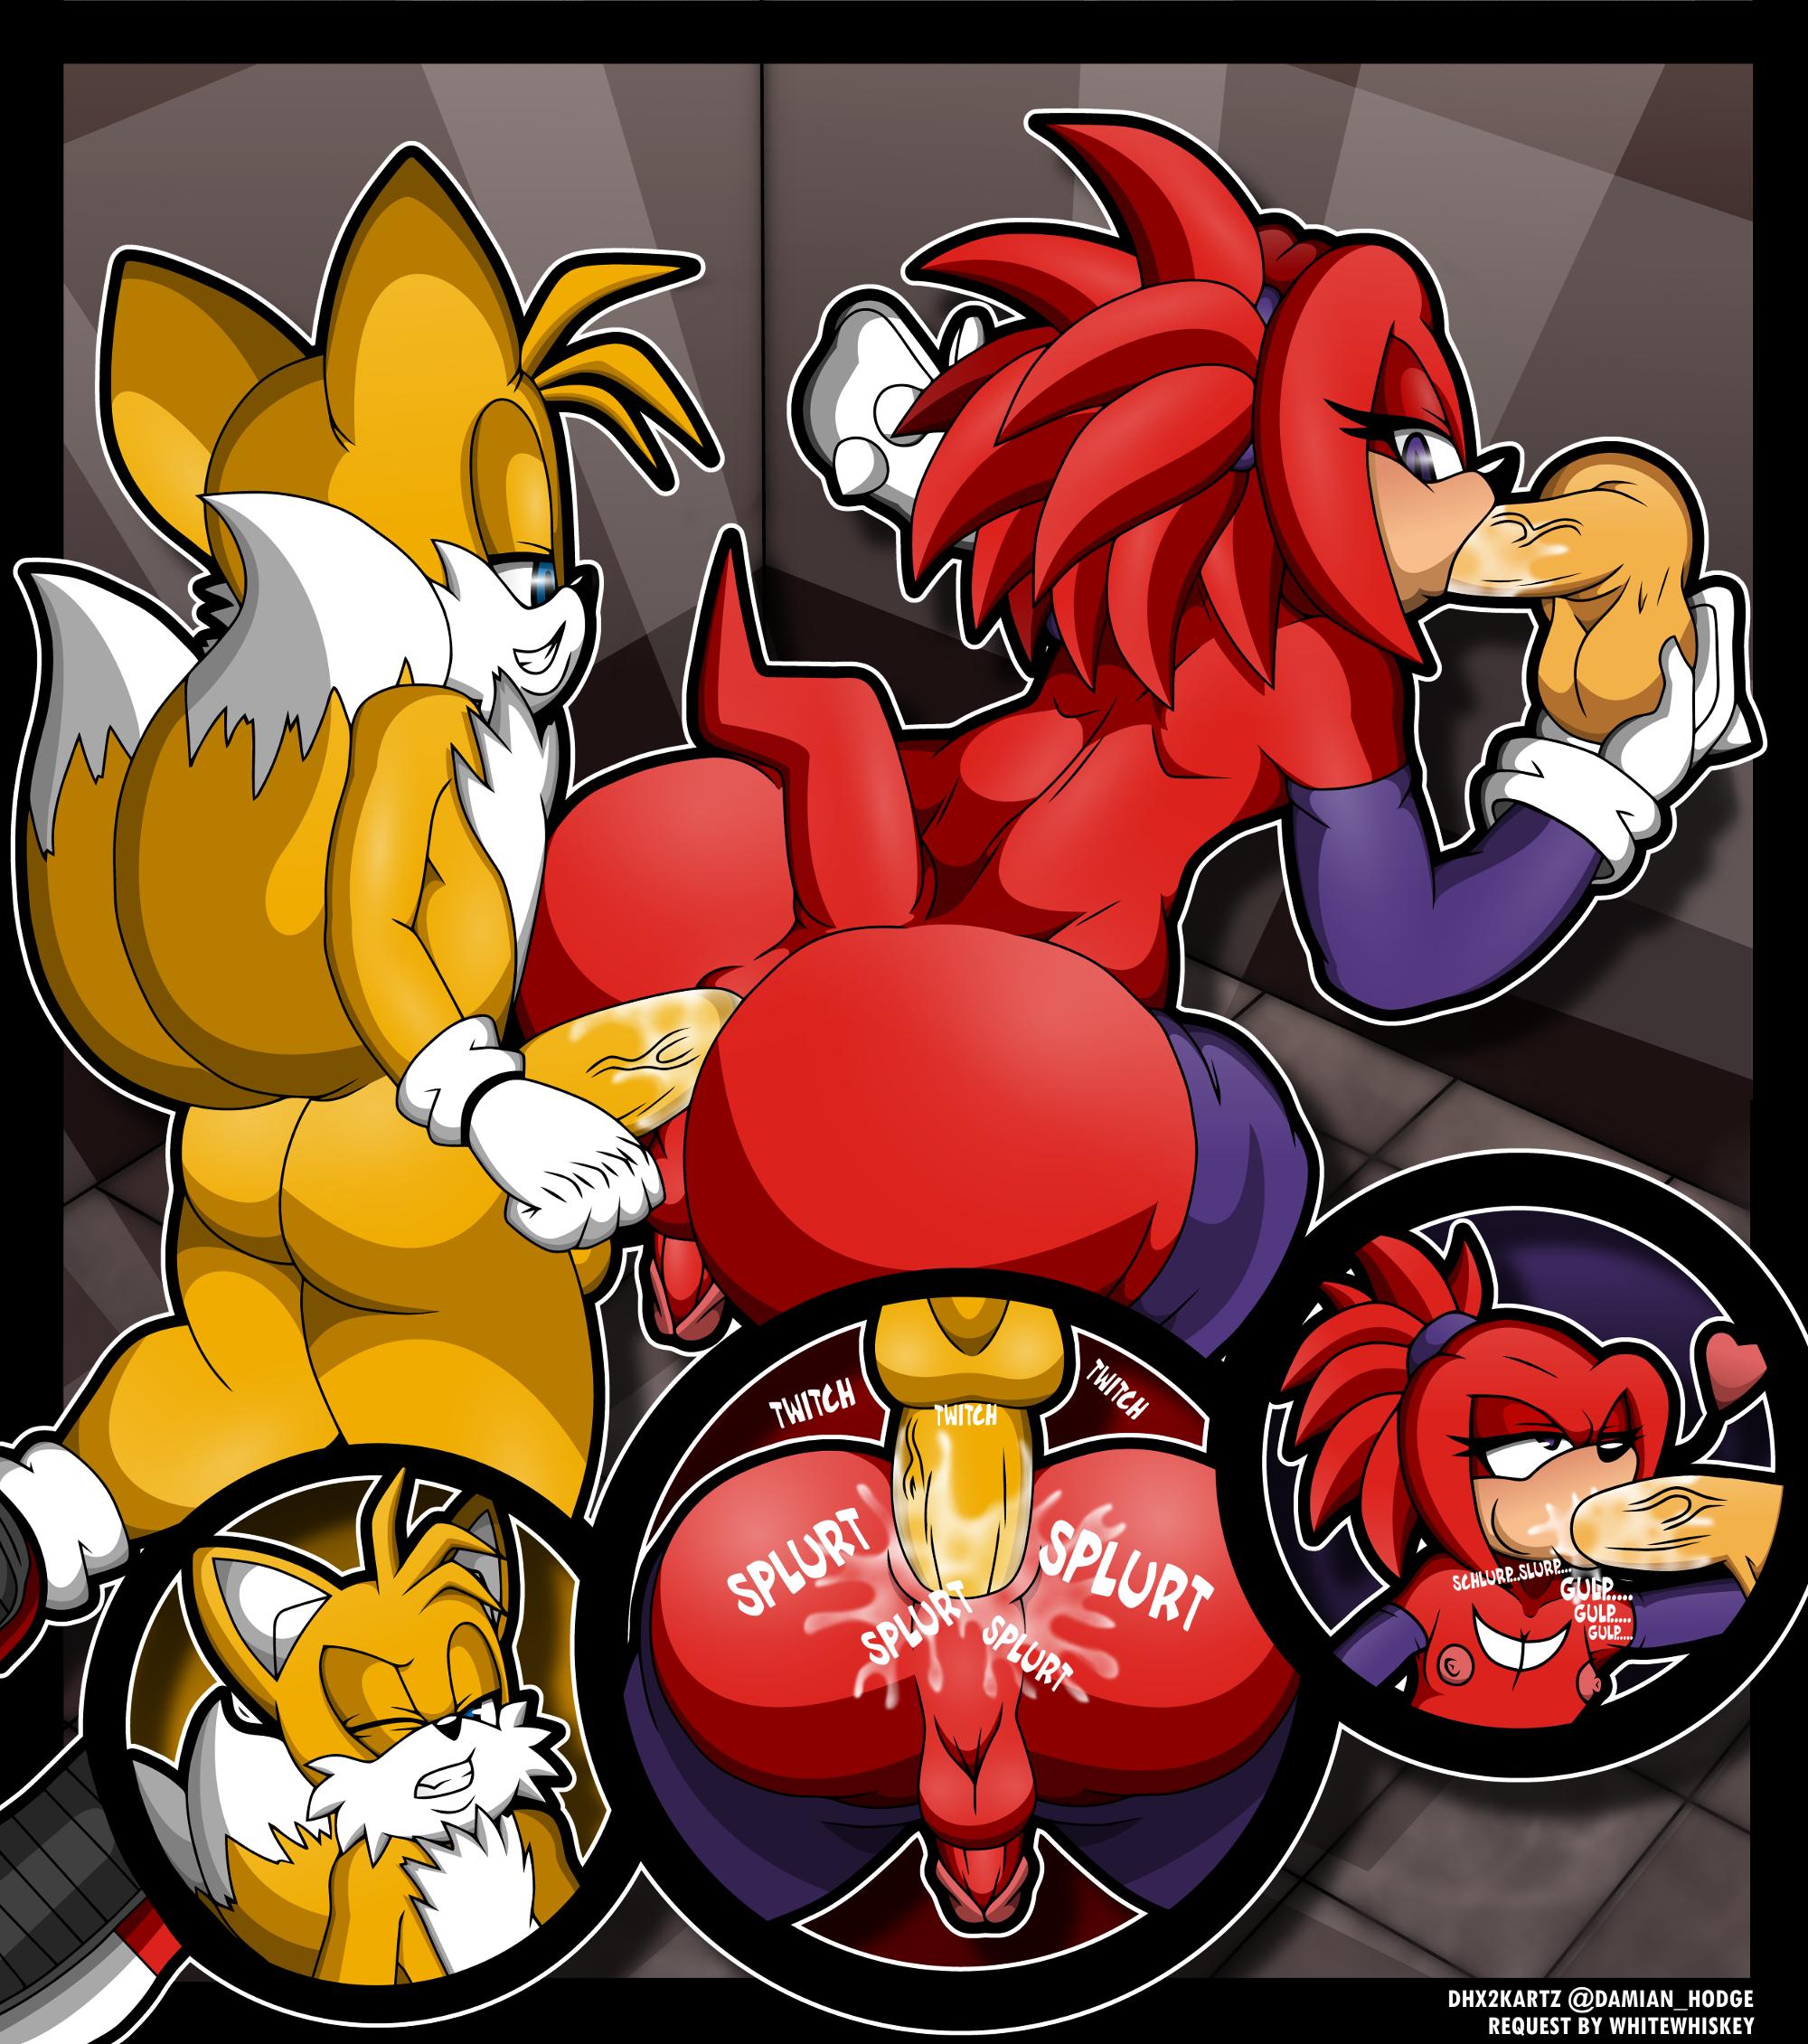 knuckles the echidna+tails.